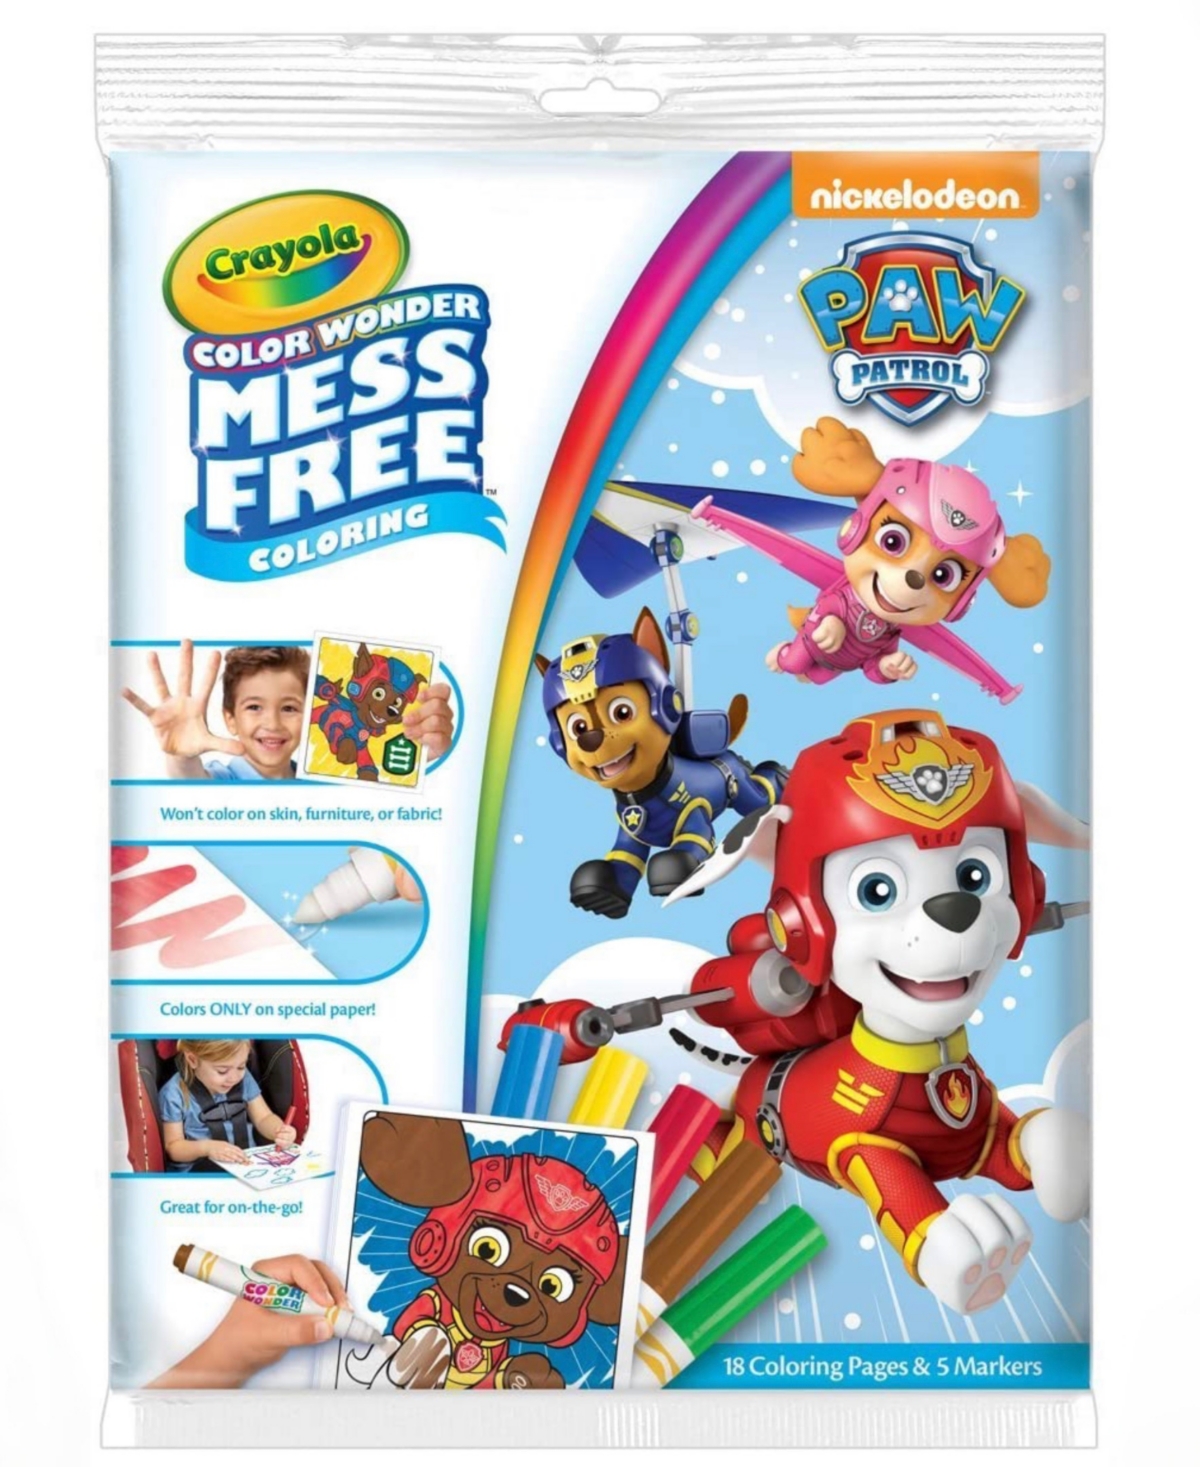 Mess Free Paw Patrol Rescue Adventures 18 Pages of Fun Games Fold lope - Multi Colored Plastic